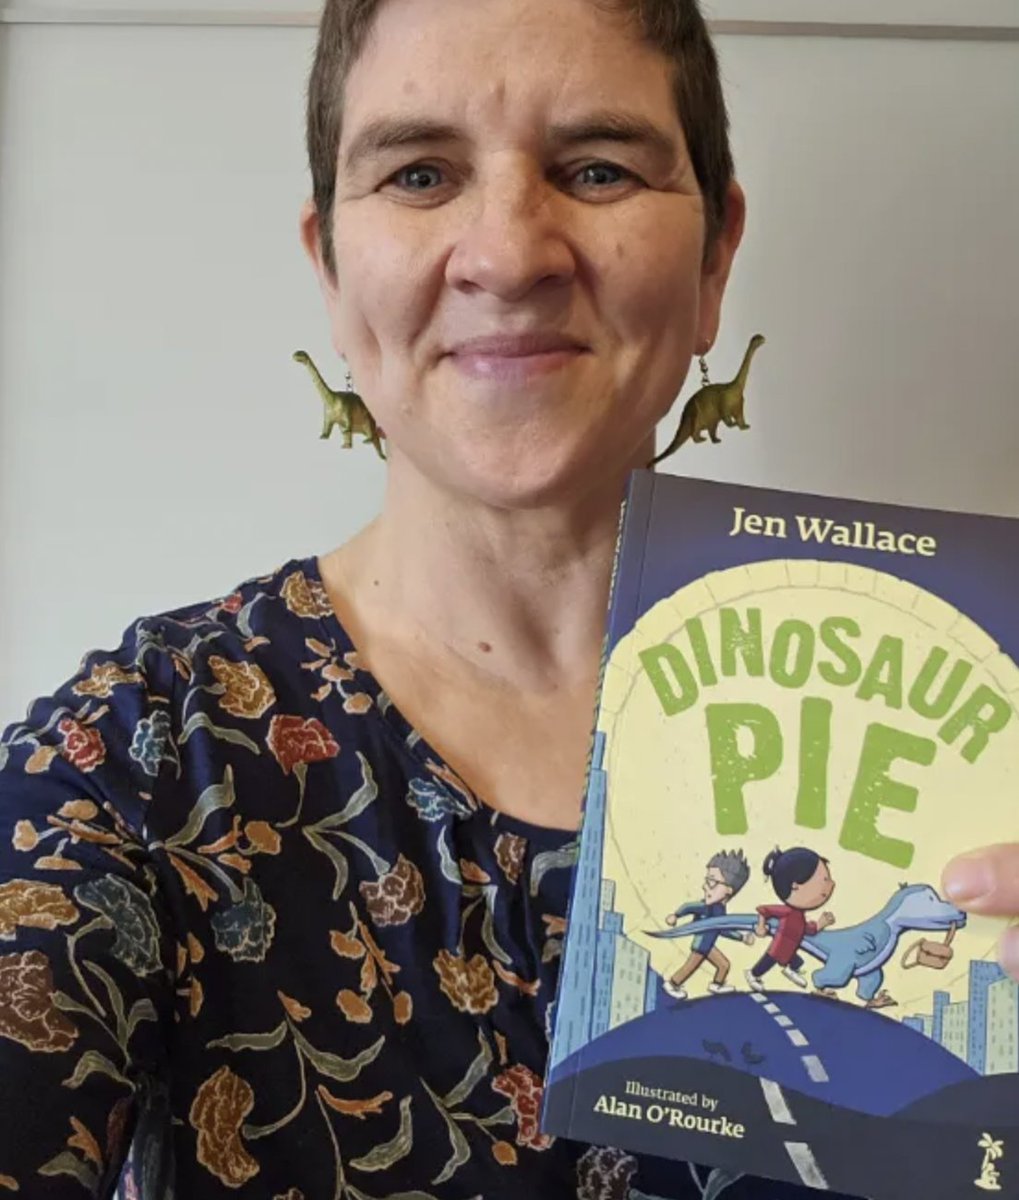 'I write all the time, it's how I process the world and how I communicate best.' Thank you @sharontwriter for interviewing @Jenscreativity on her new book #DinosaurPie, illustrated by @alanorourke! DINOSAUR PIE is out now. sharonthompson.substack.com/p/dinosaur-pie